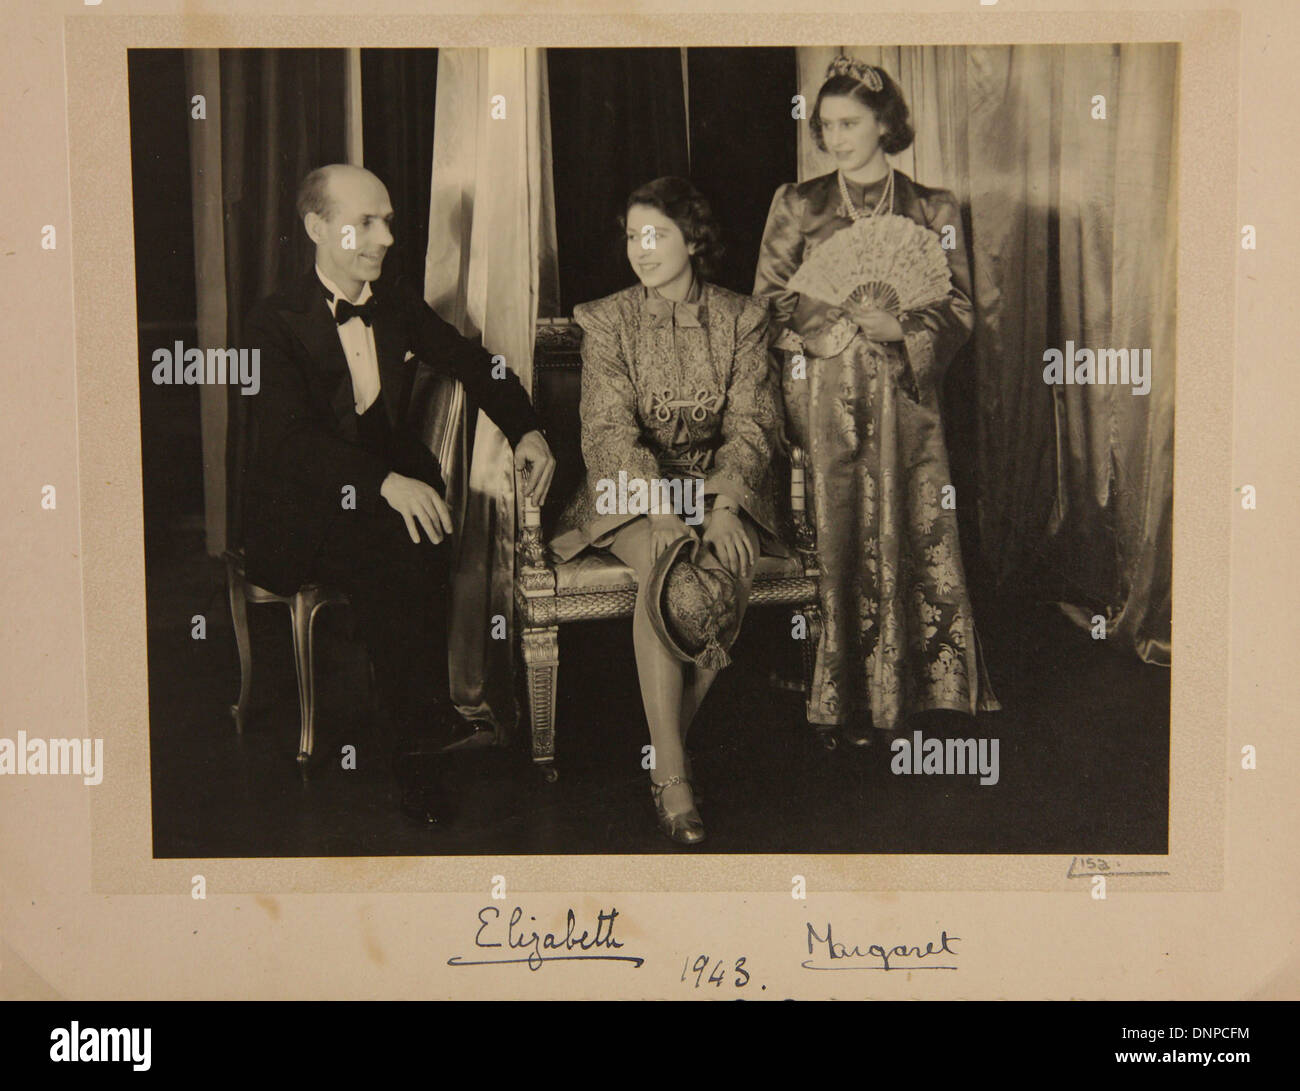 A signed photograph of Princess Margaret (right) and Princess Elizabeth (left) in the play Aladdin, 1943 Stock Photo